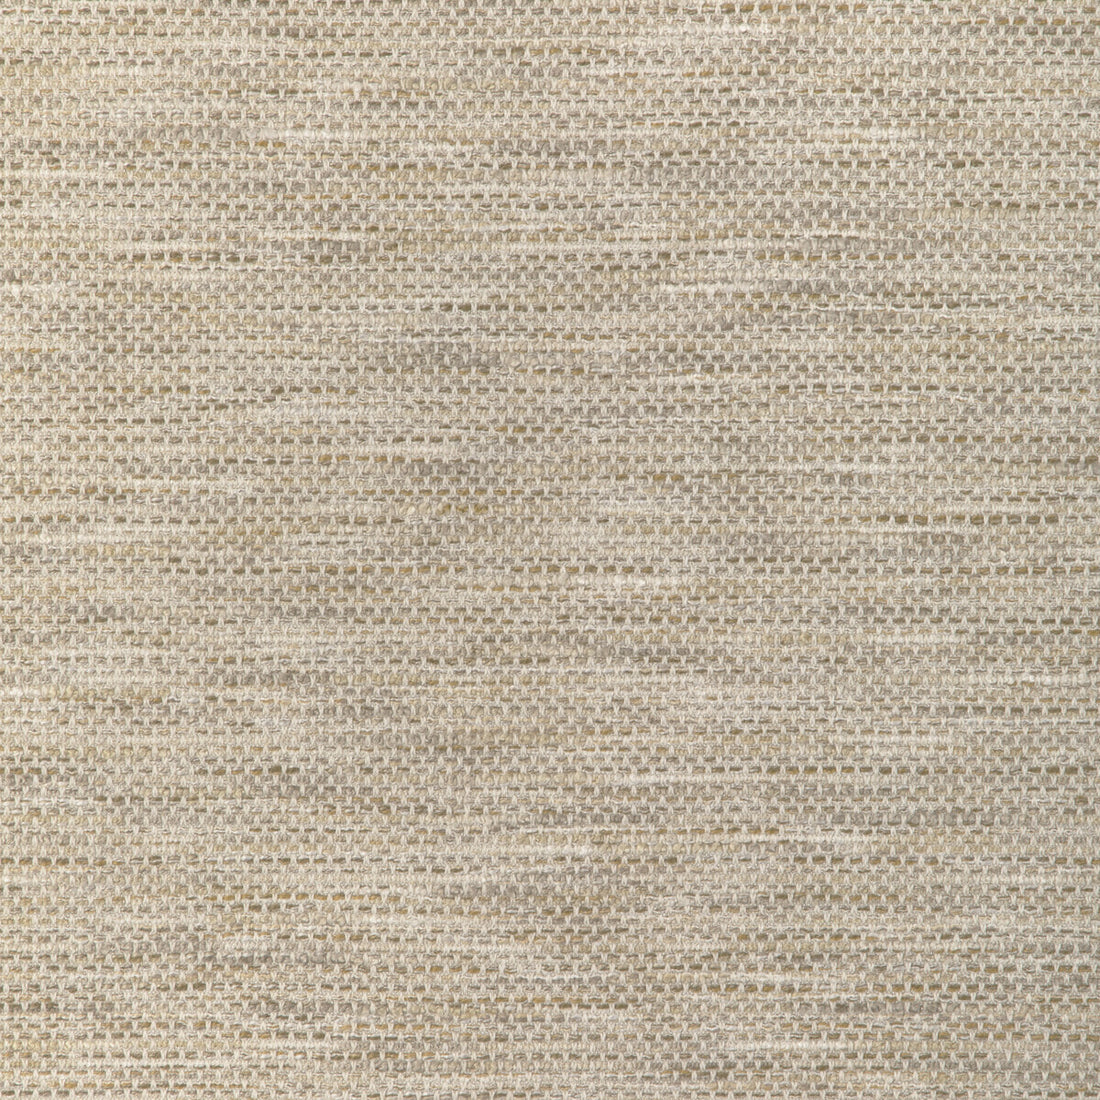 Kravet Design fabric in 37207-106 color - pattern 37207.106.0 - by Kravet Design in the Woven Colors collection